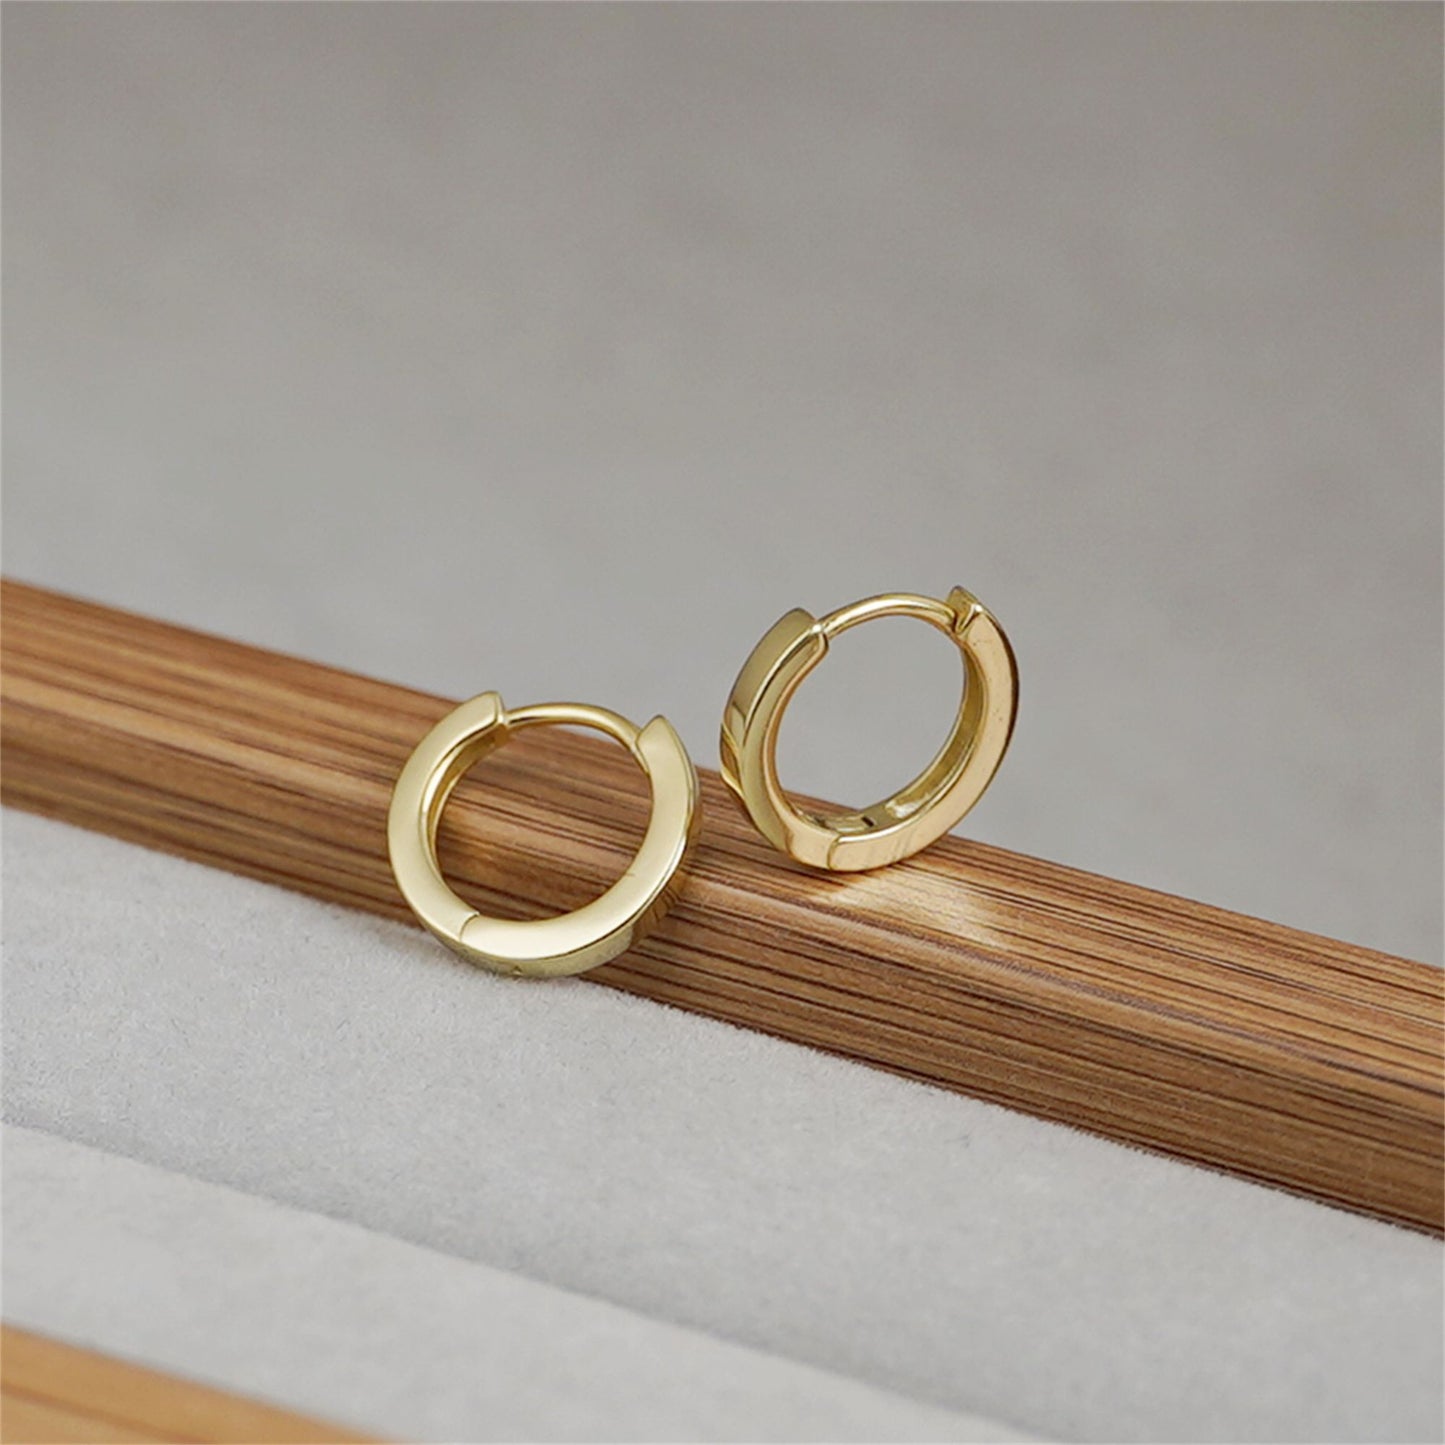 10mm Cuff Hoop Earrings with 2mm Band in 18K Gold Plated Sterling Silver